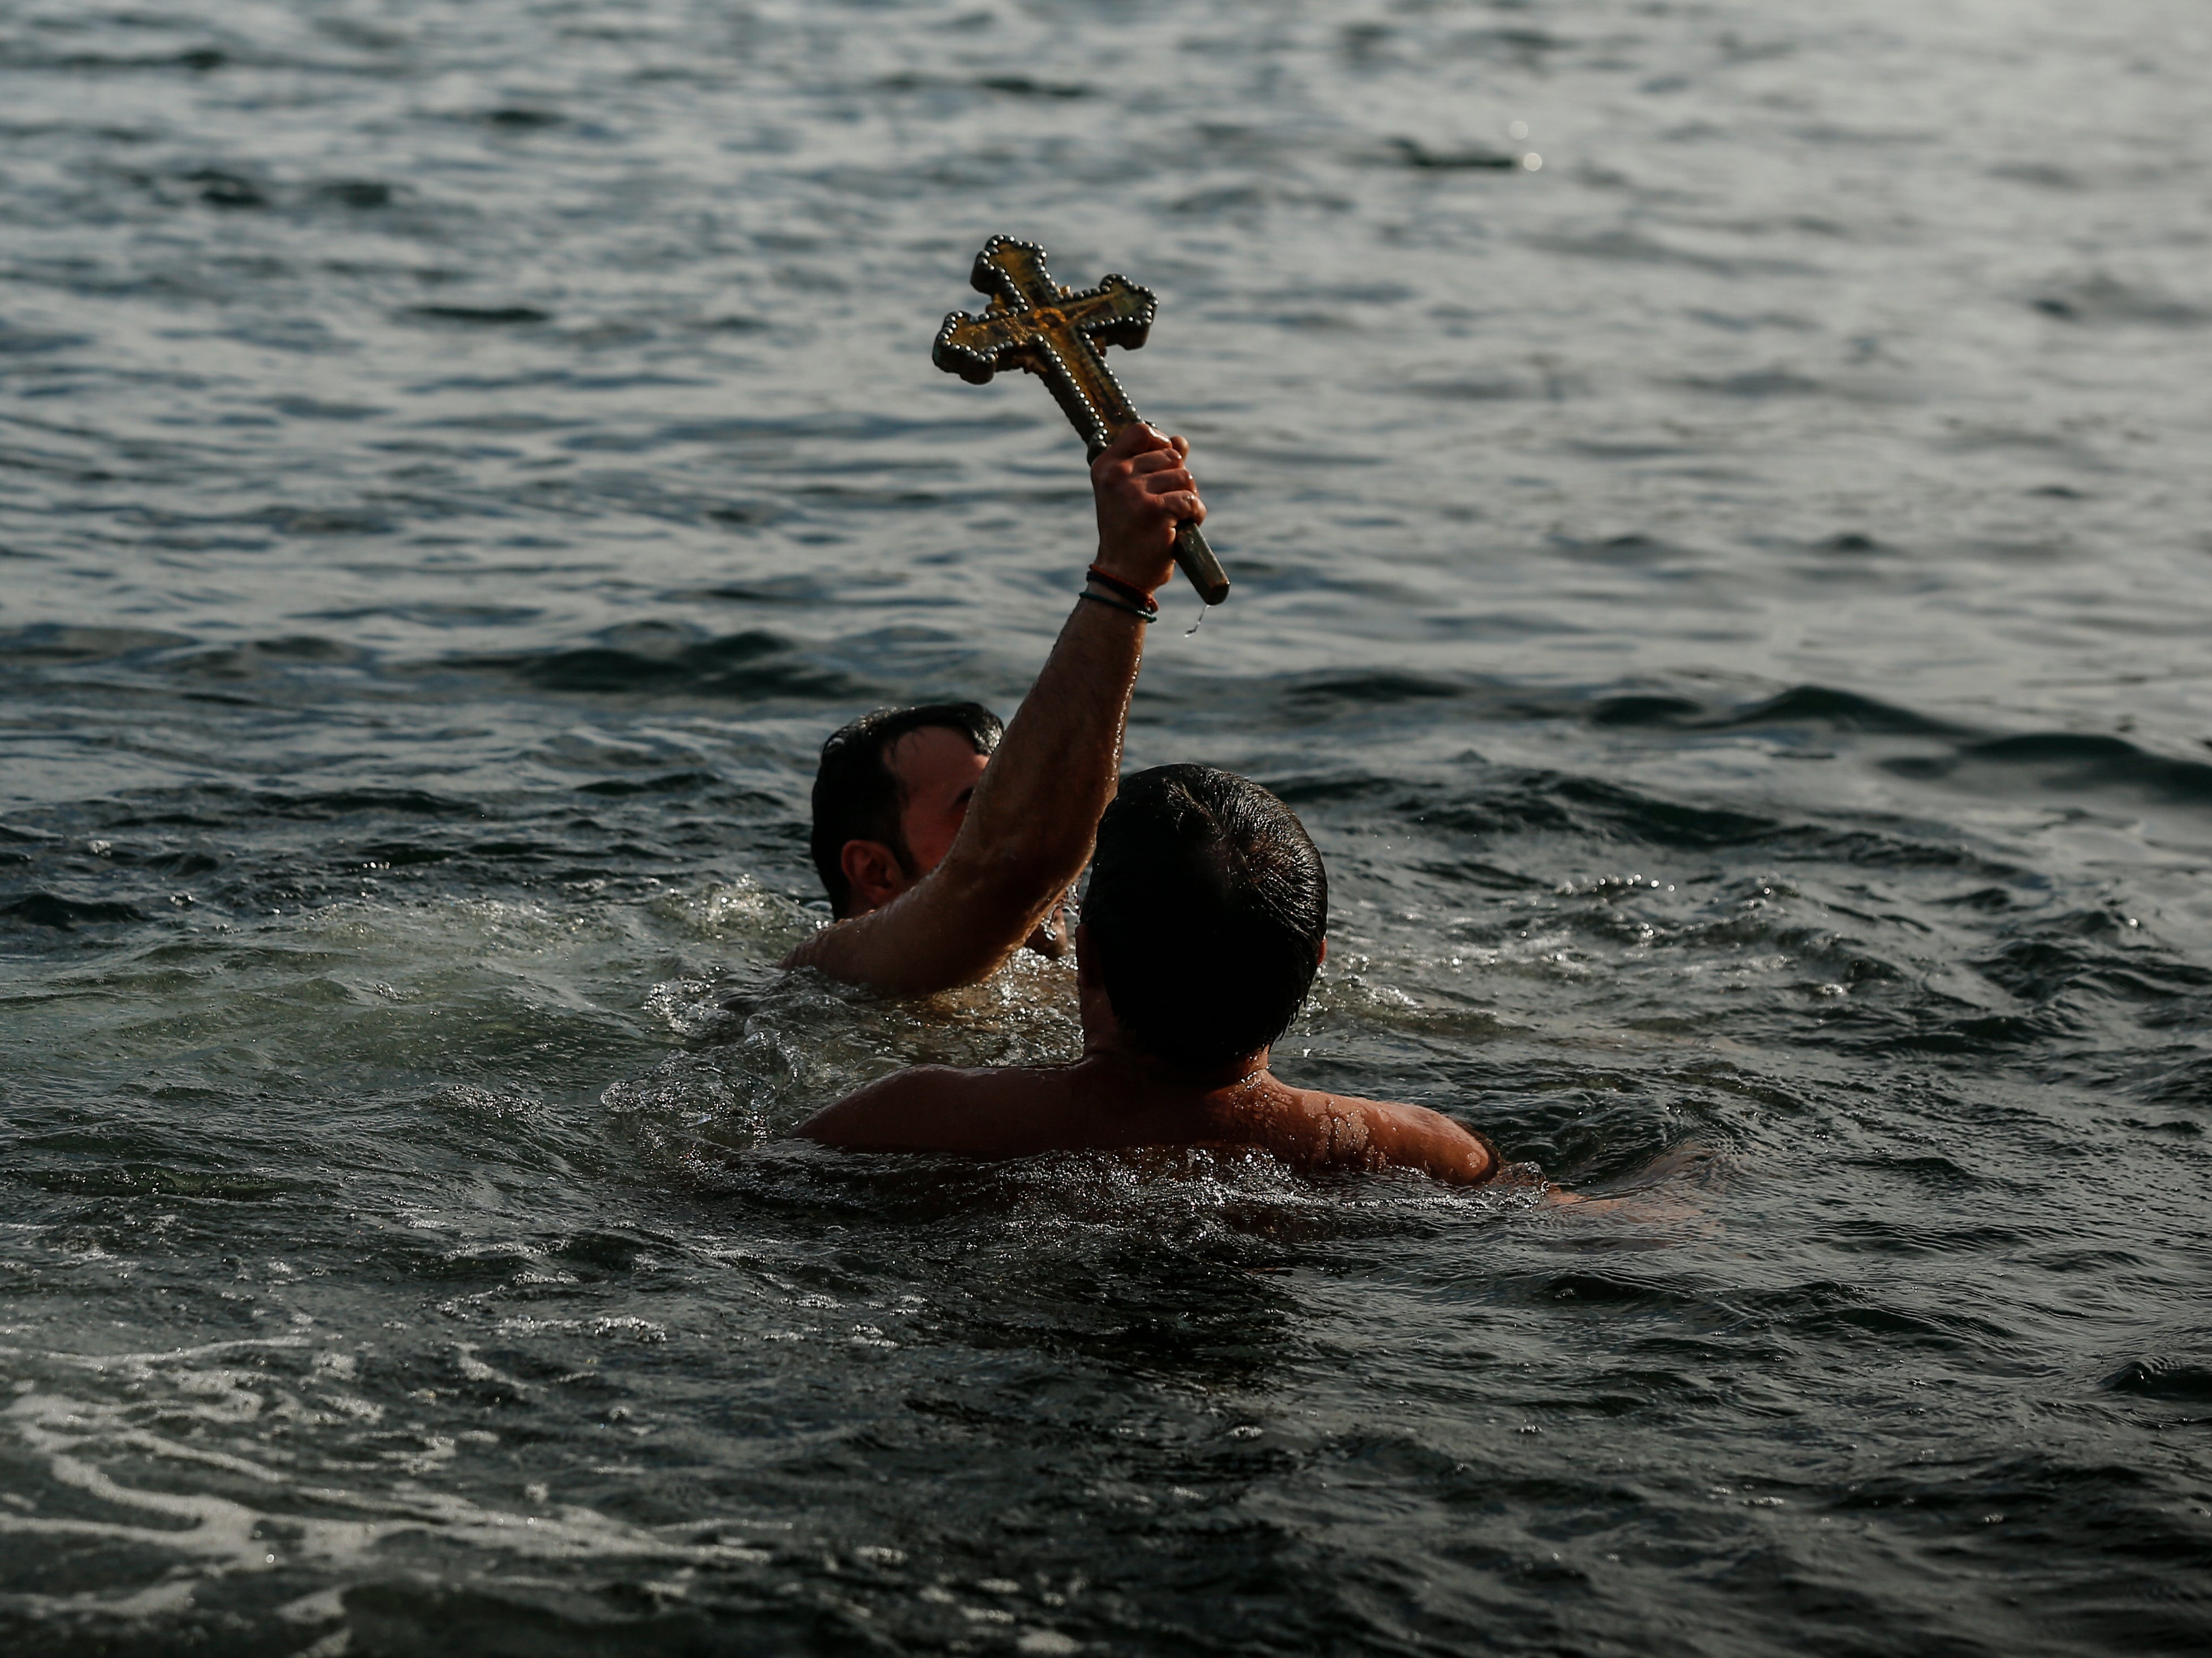 Greek Orthodox faithful, Vasili Kurkcu, holds a wooden crucifix after retrieving it in the Golden Horn during the Epiphany ceremony in Istanbul